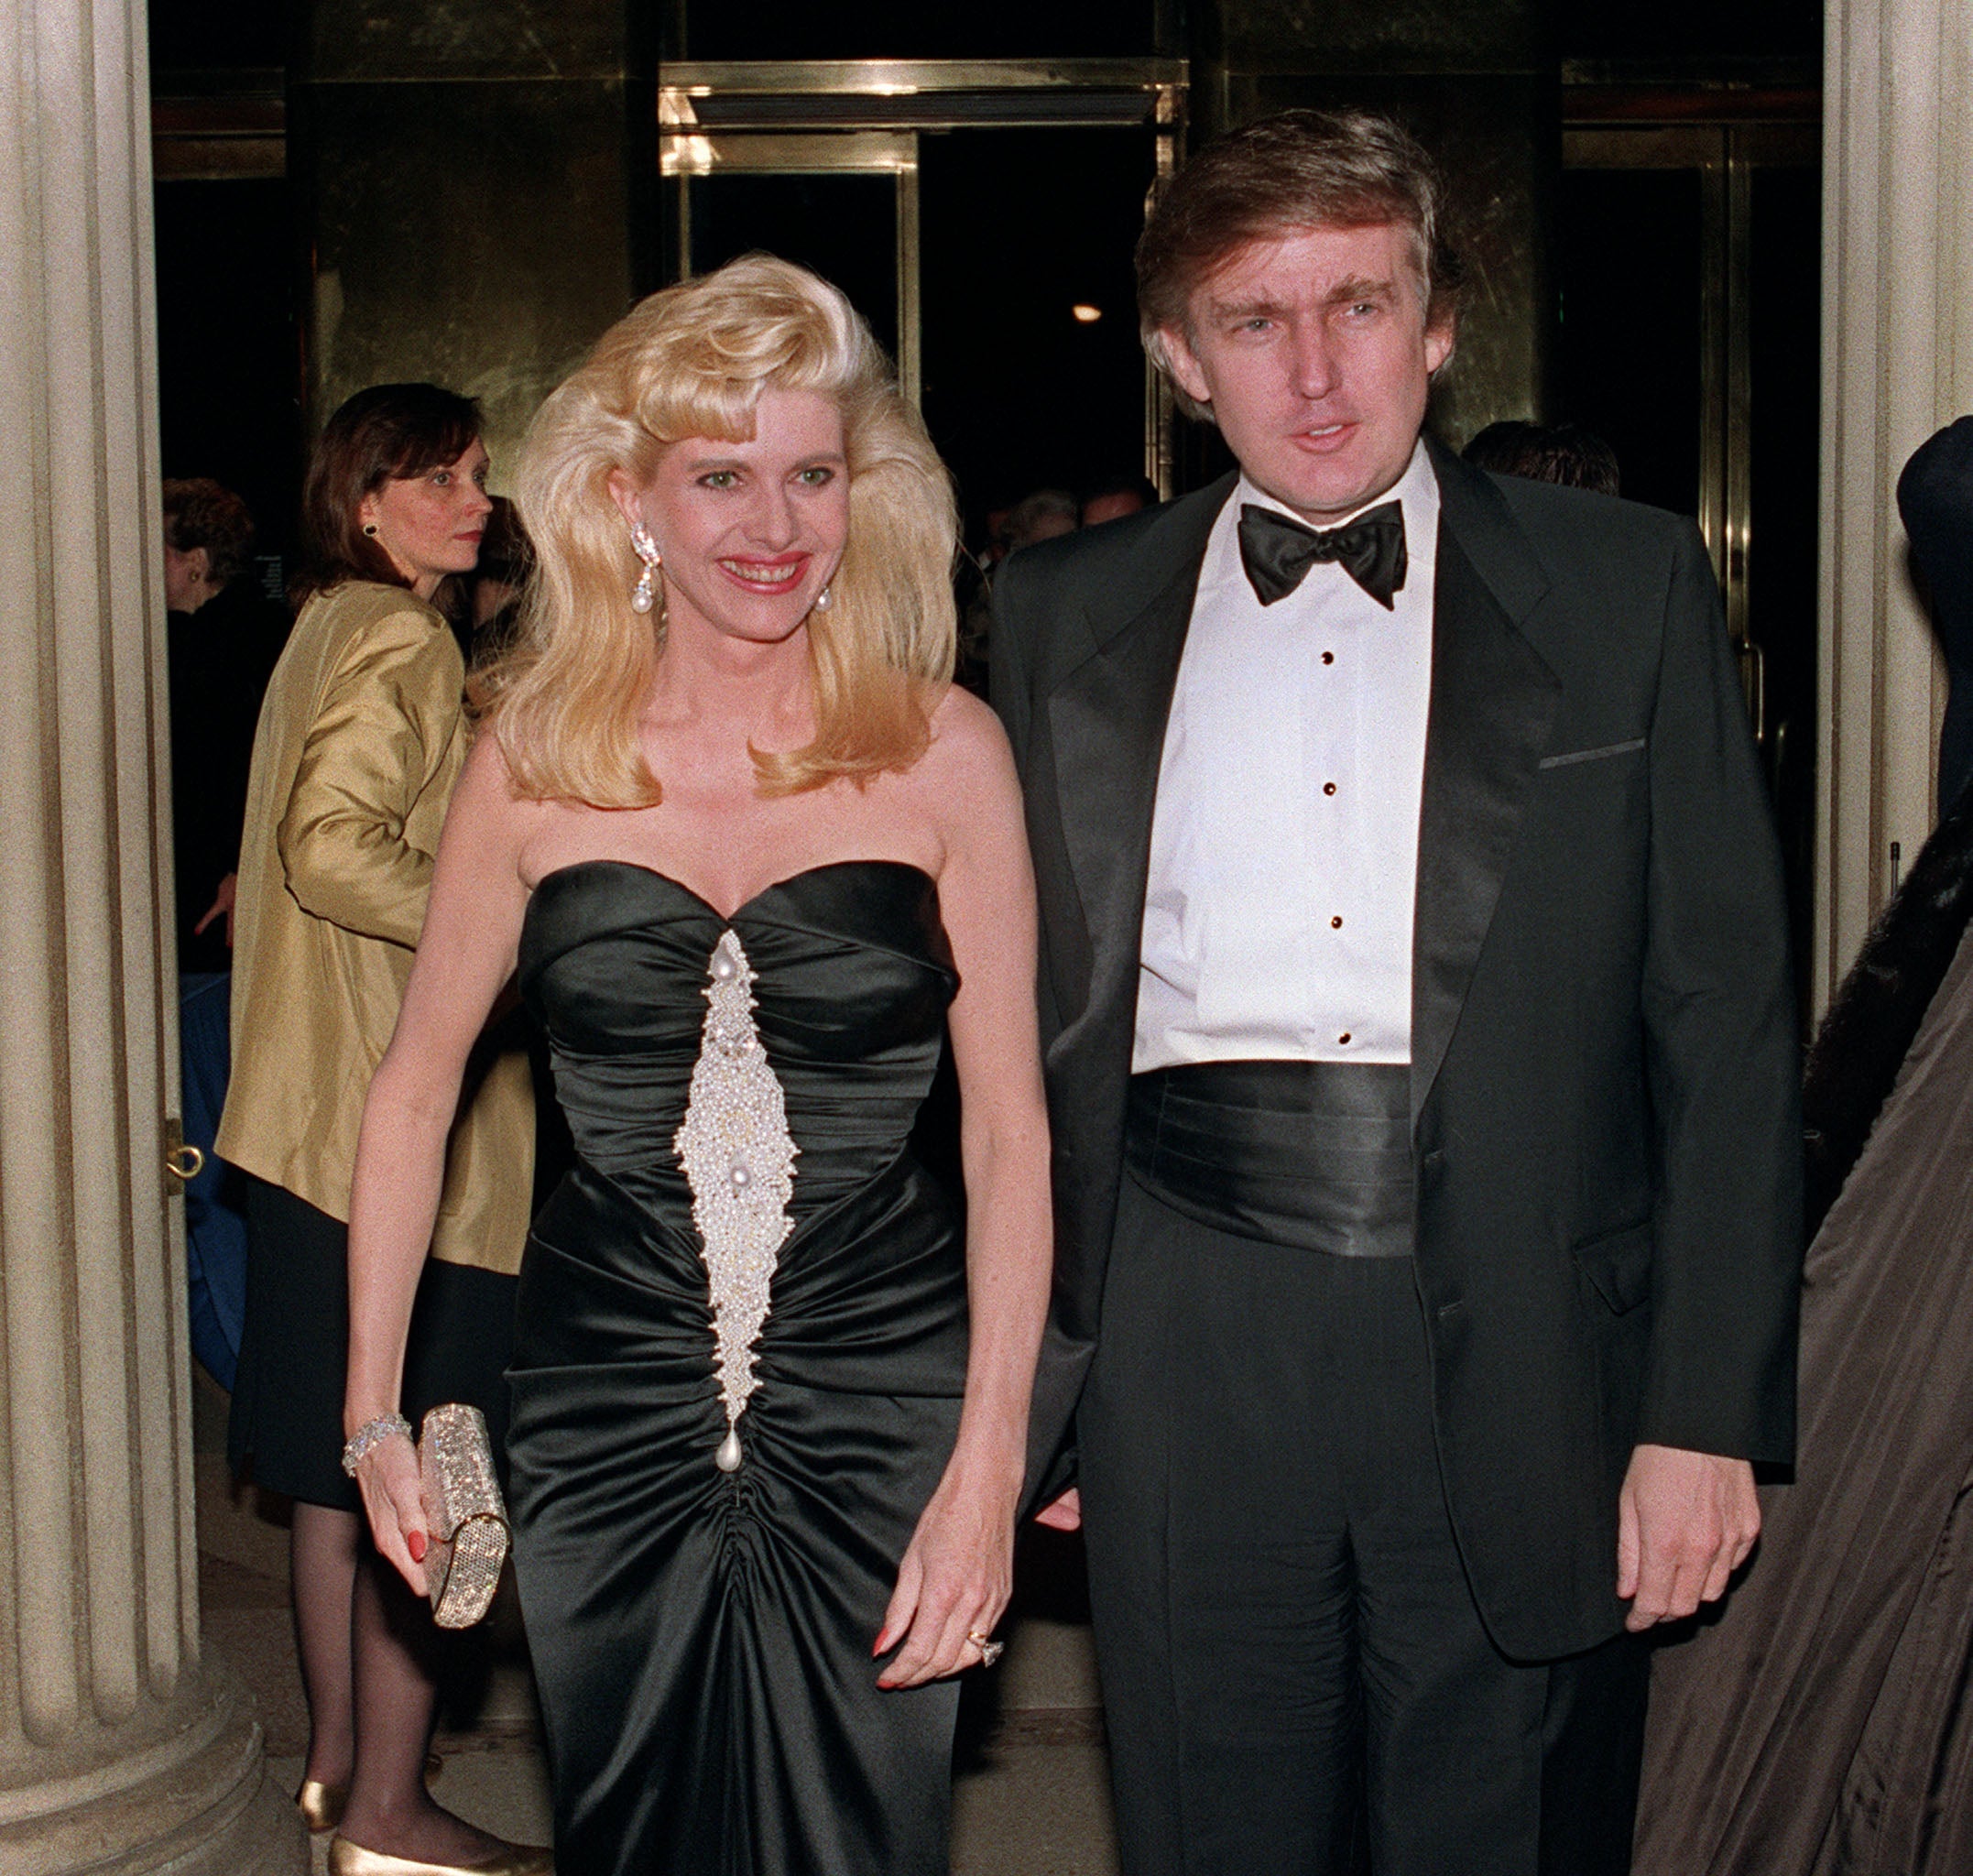 Ivana and Donald Trump, pictured in 1989, were married from 1977 to 1990.